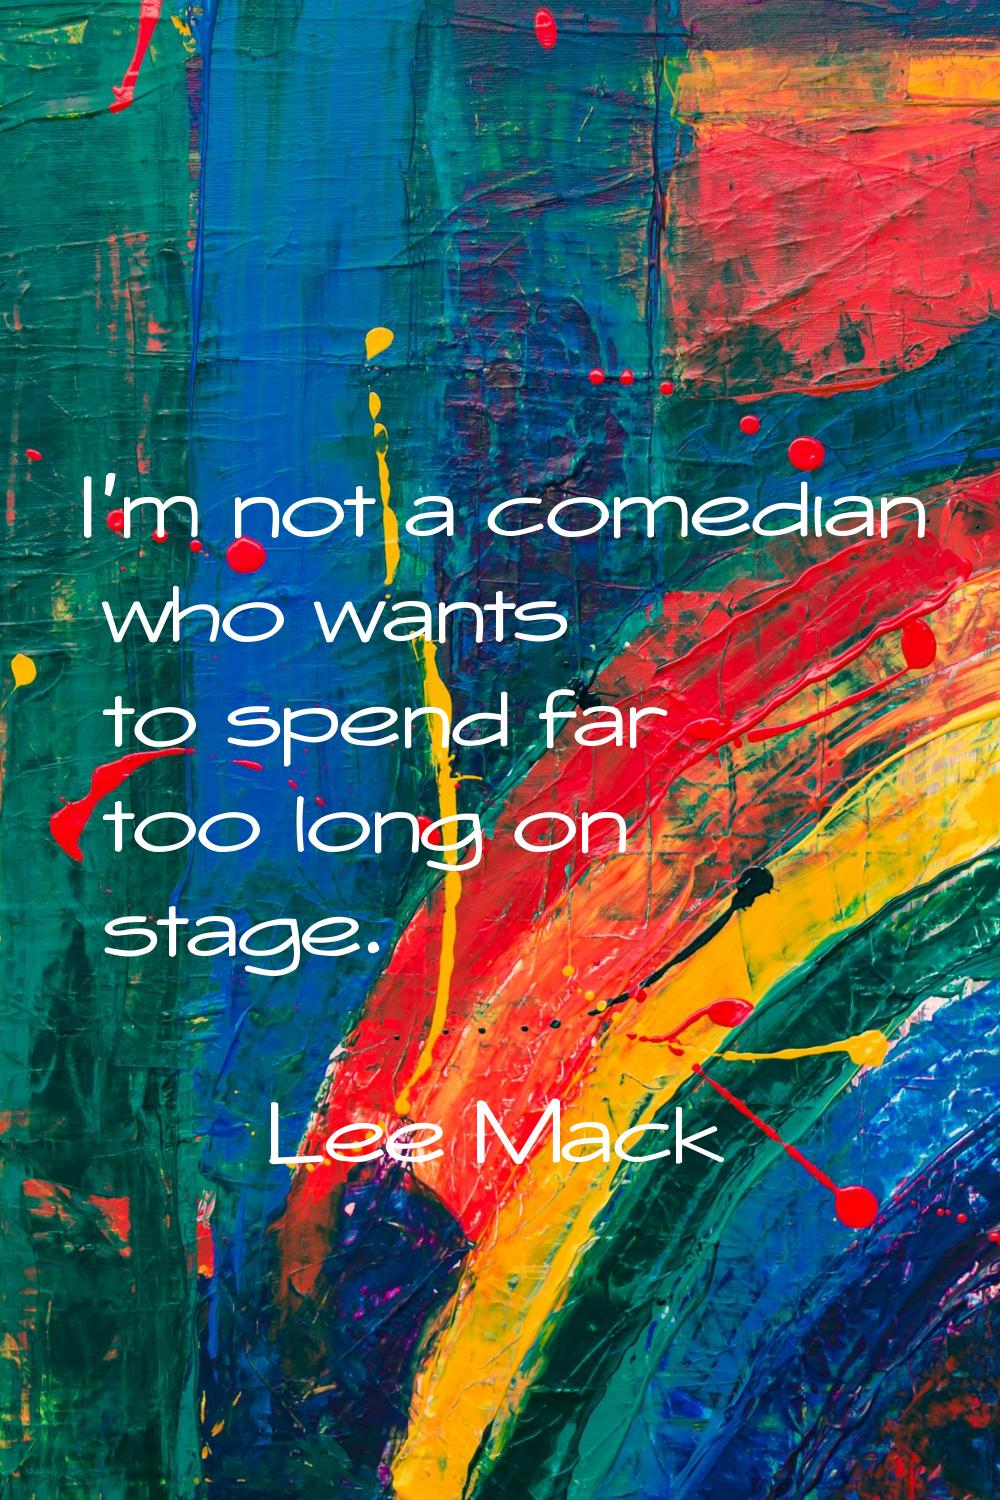 I'm not a comedian who wants to spend far too long on stage.